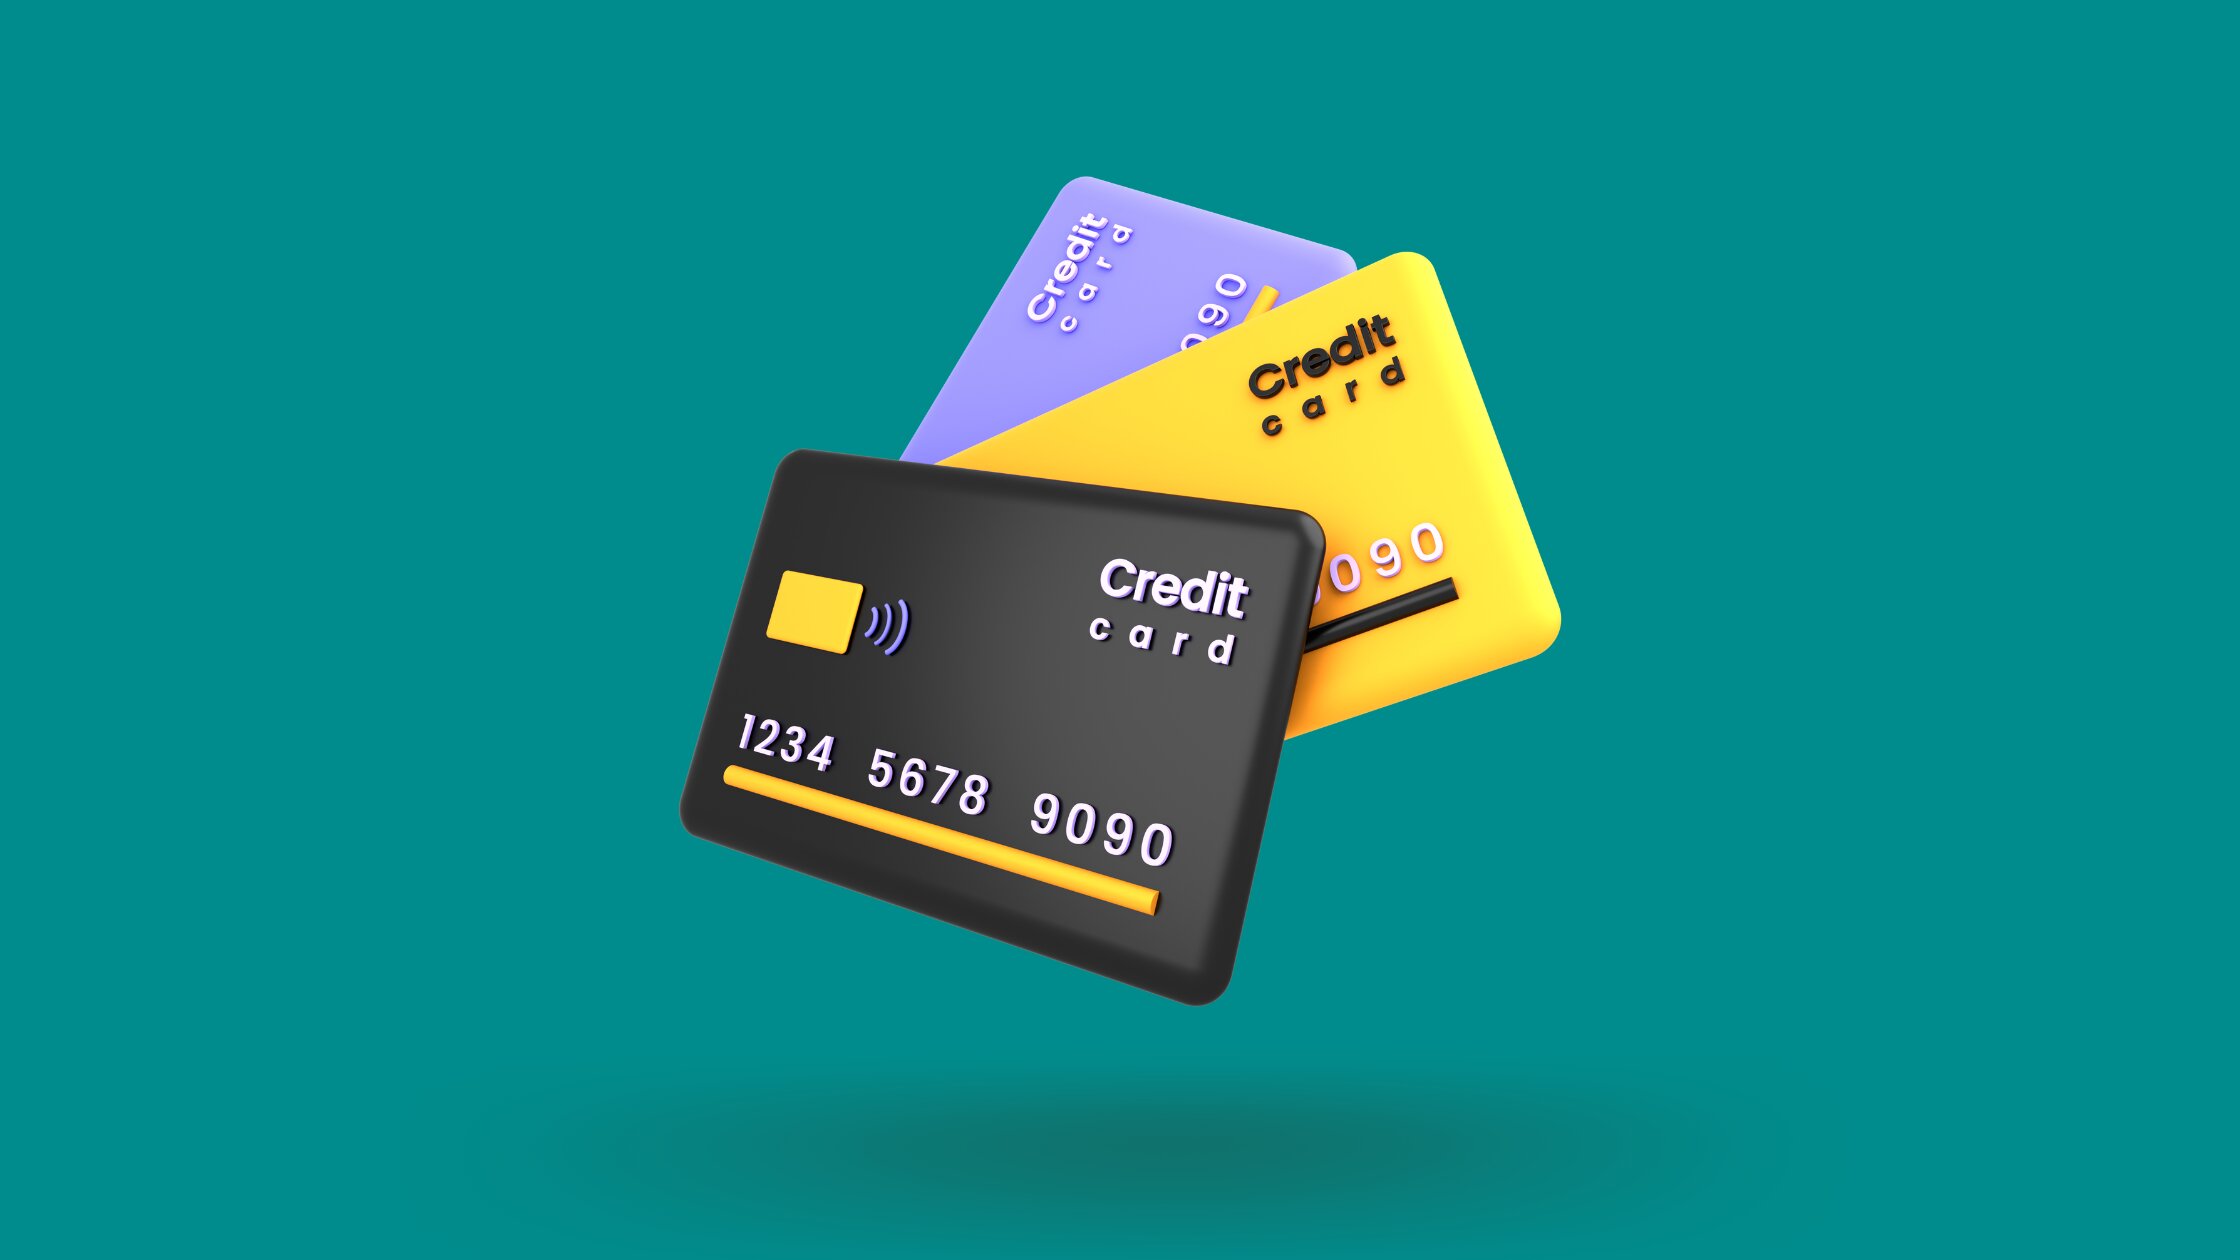 How Does Crypto Credit Card Work